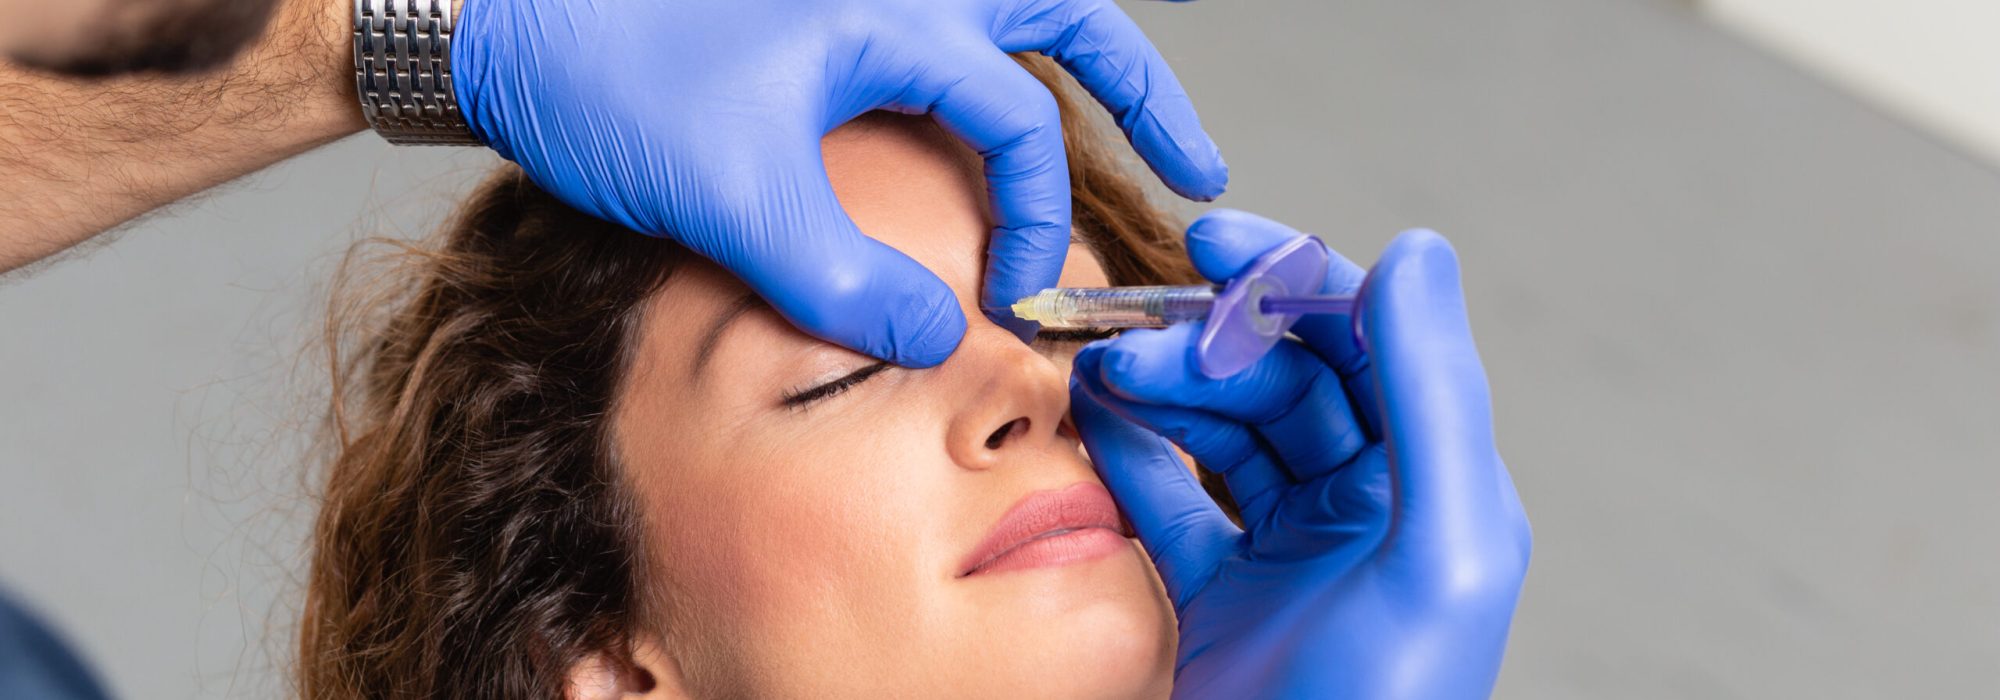 Close,Up,Of,Beautician,Expert's,Hands,Injecting,Botox.